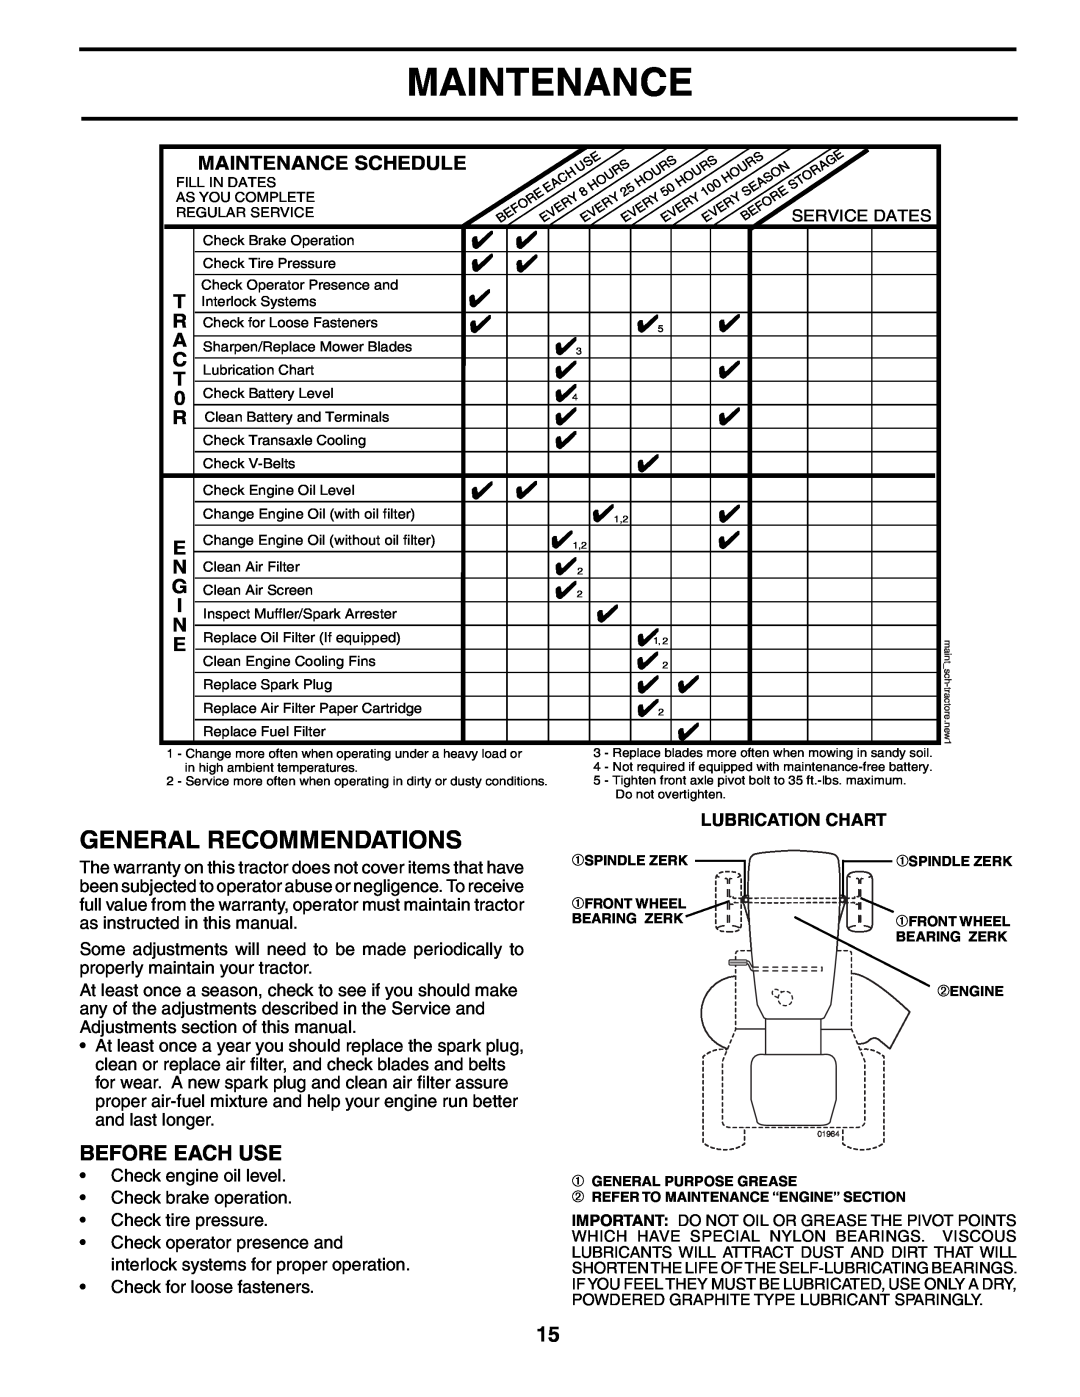 Husqvarna YTH1542XP owner manual General Recommendations, Before Each Use, Maintenance Schedule 